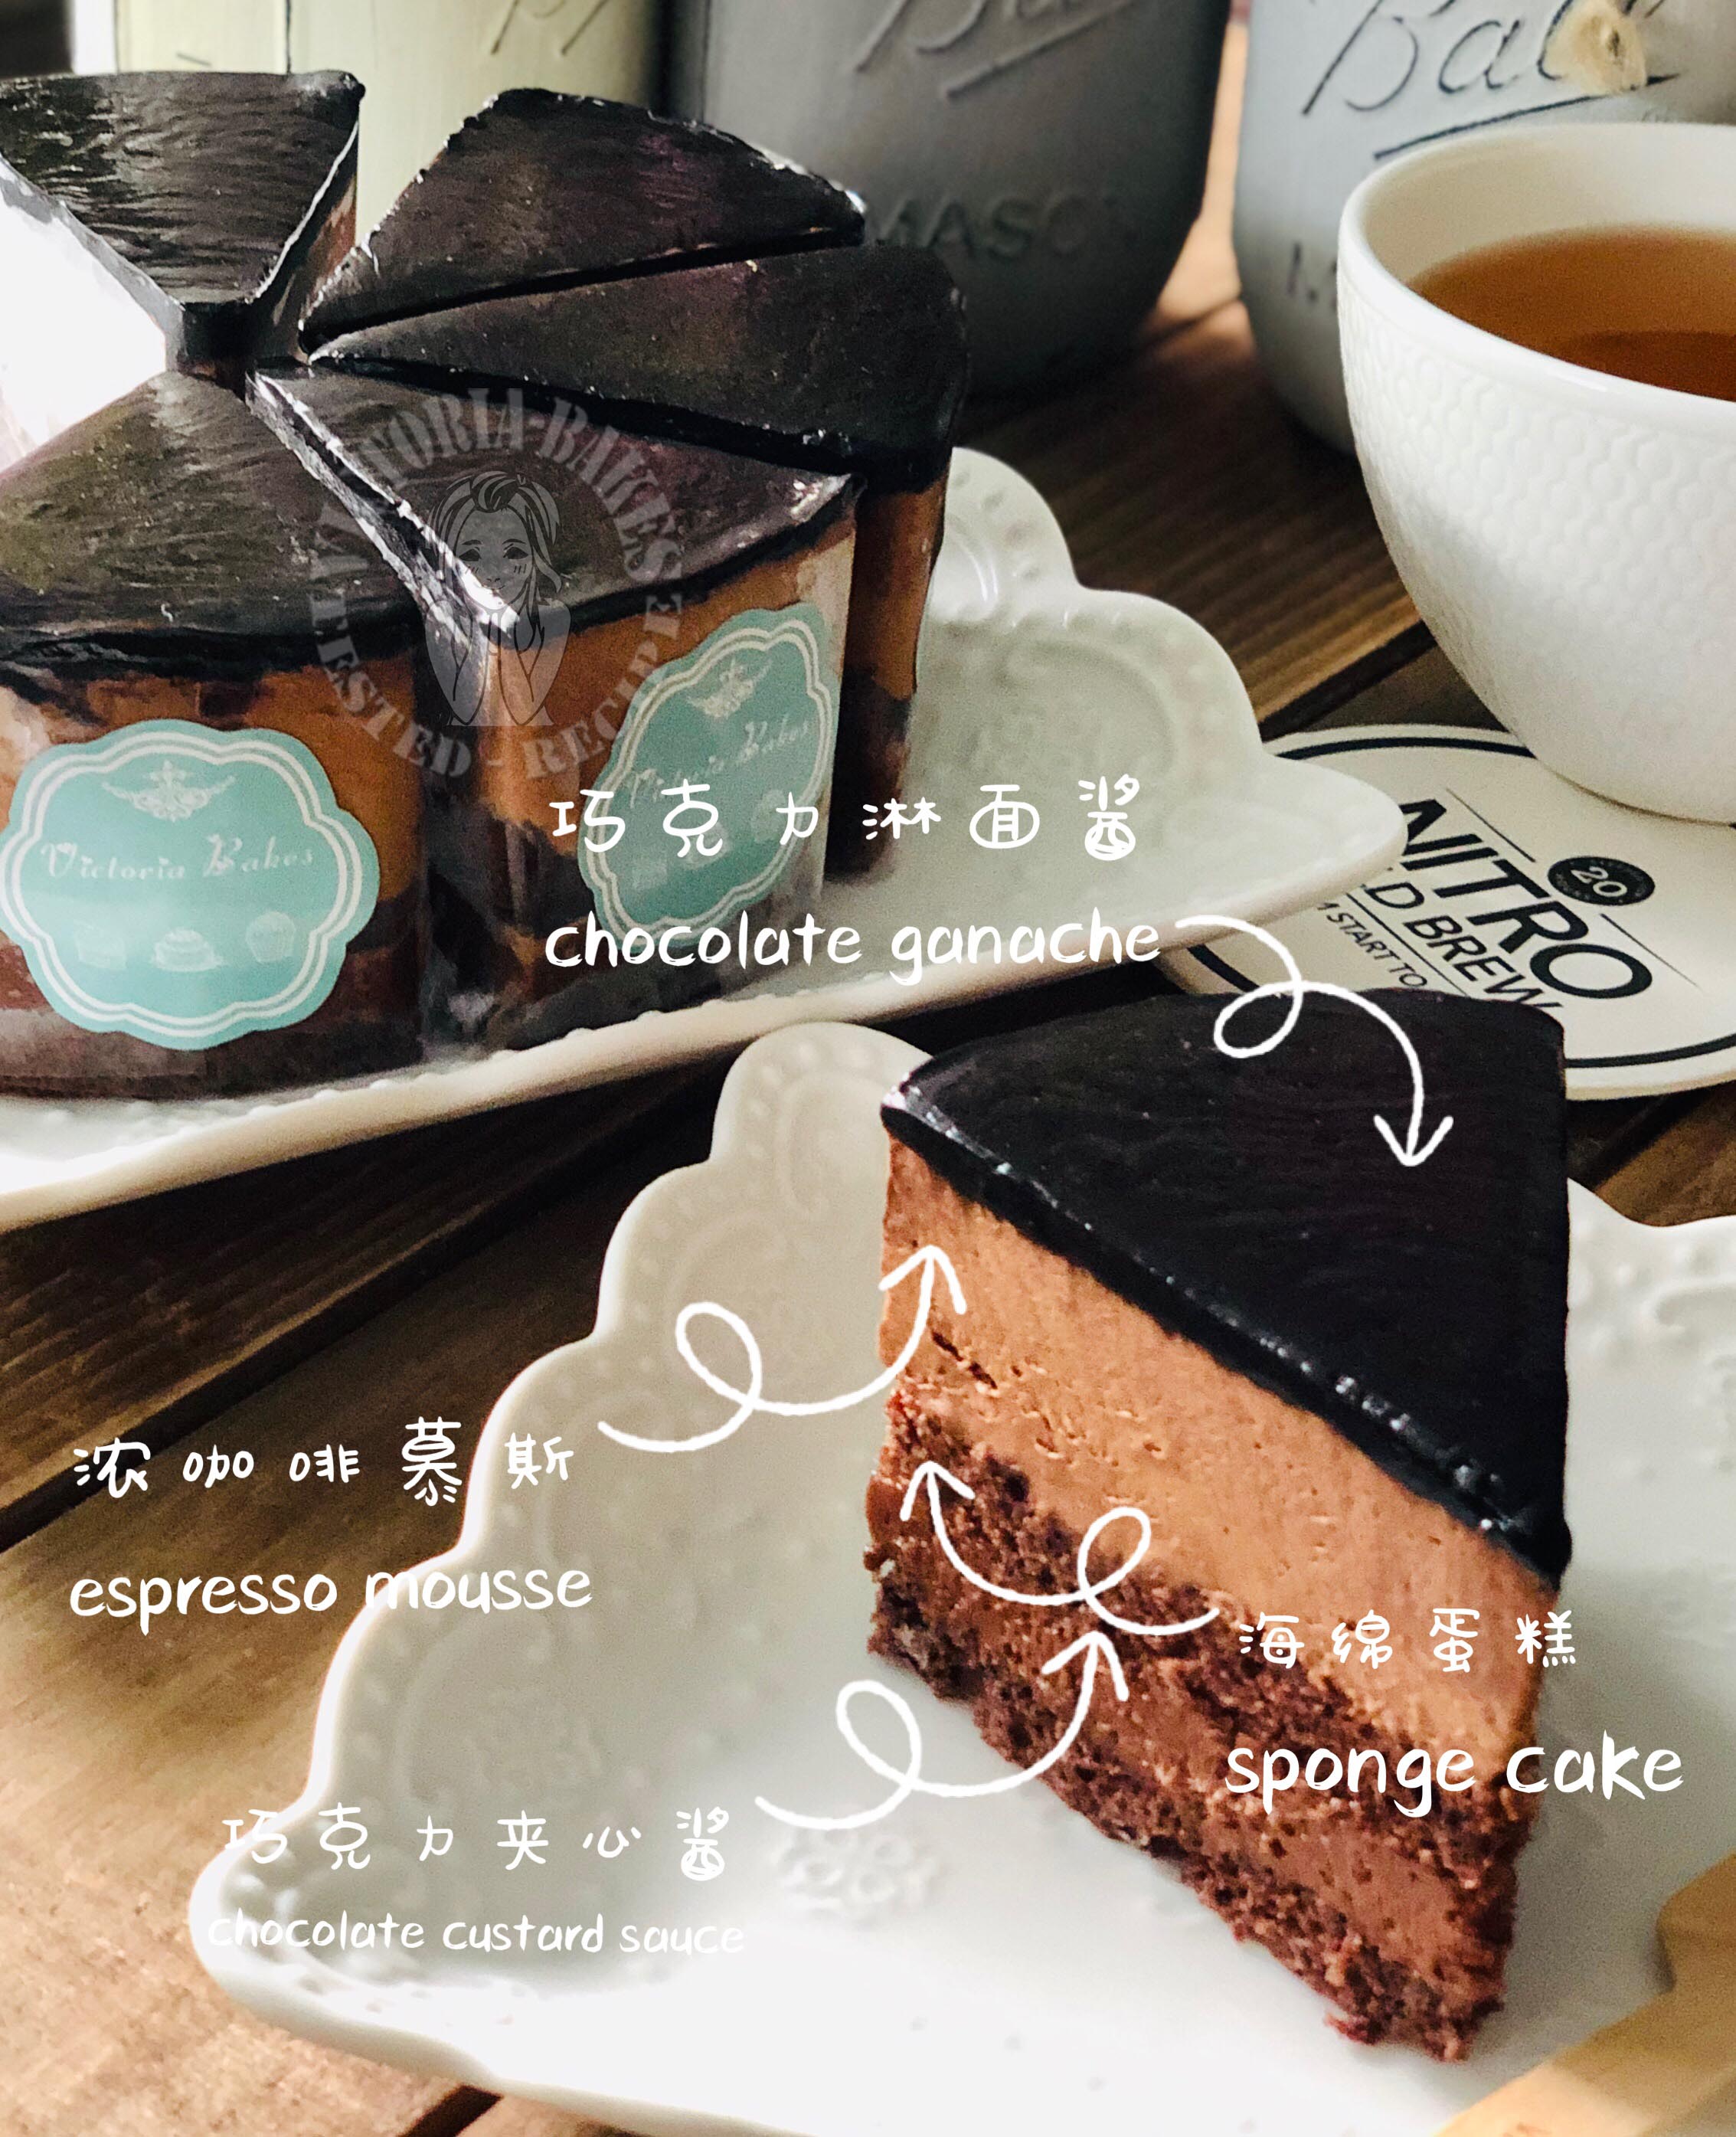 chocolate-espresso mousse cake ~ highly recommended 巧克力浓咖啡慕斯蛋糕 ～ 强推